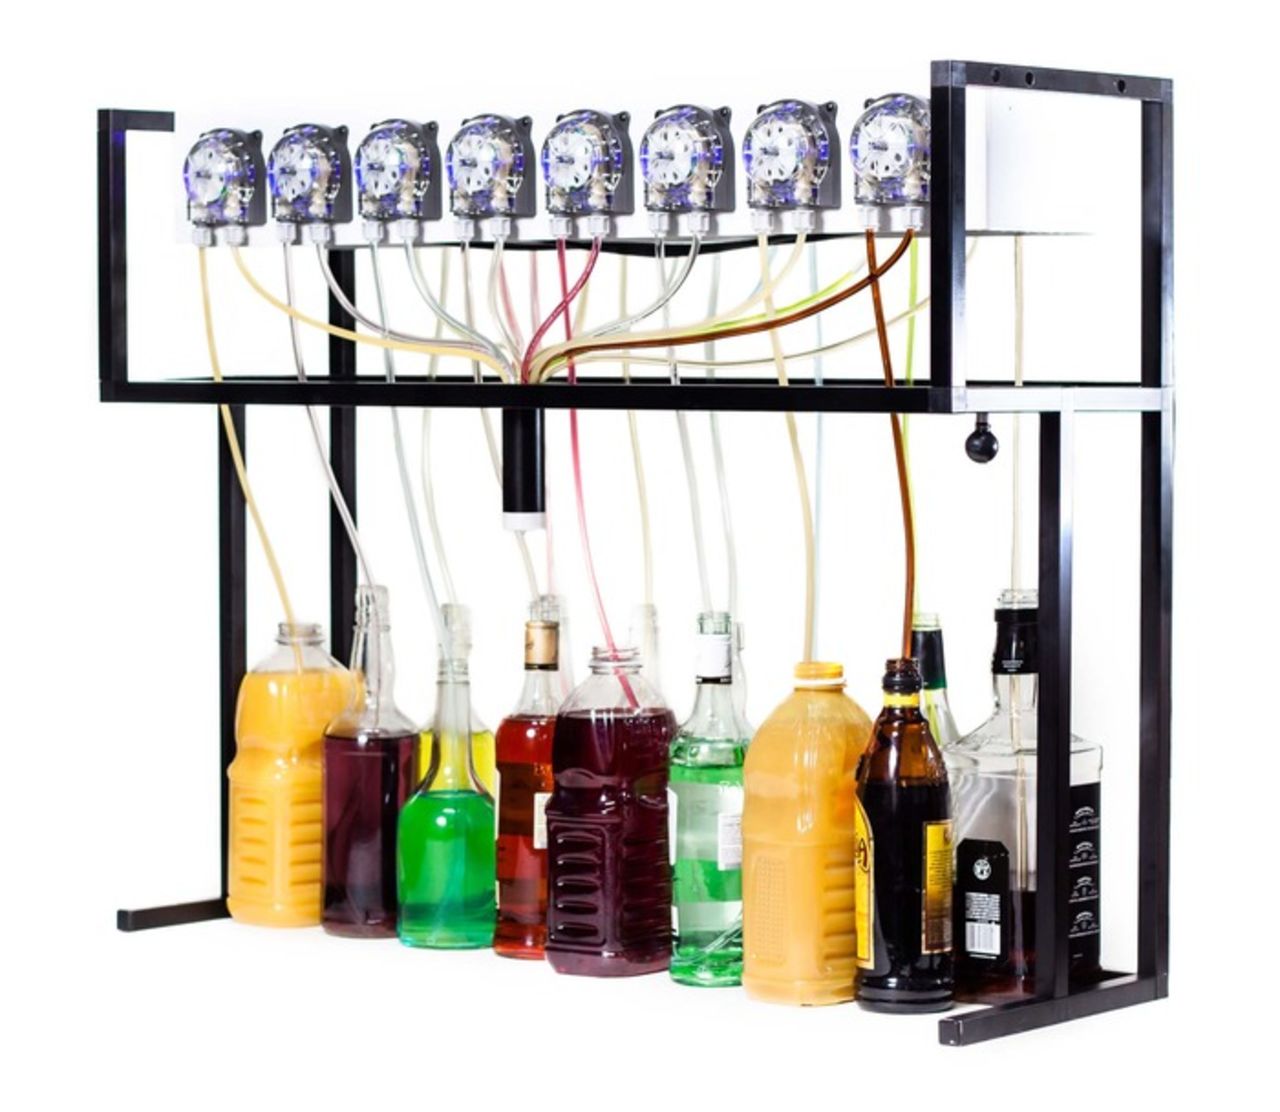 Rival cocktail waiter <a href="http://partyrobotics.com/" target="_blank" target="_blank"><strong>Bartendro</strong></a> might look like a tangle of kid's Krazy straws, but this Arduino cocktail factory contains a Wi-Fi connected mixer which can be accessed from any device. A 15 bottle mixer will set you back $2,400, but the open source hardware and software allows for limitless customization. 